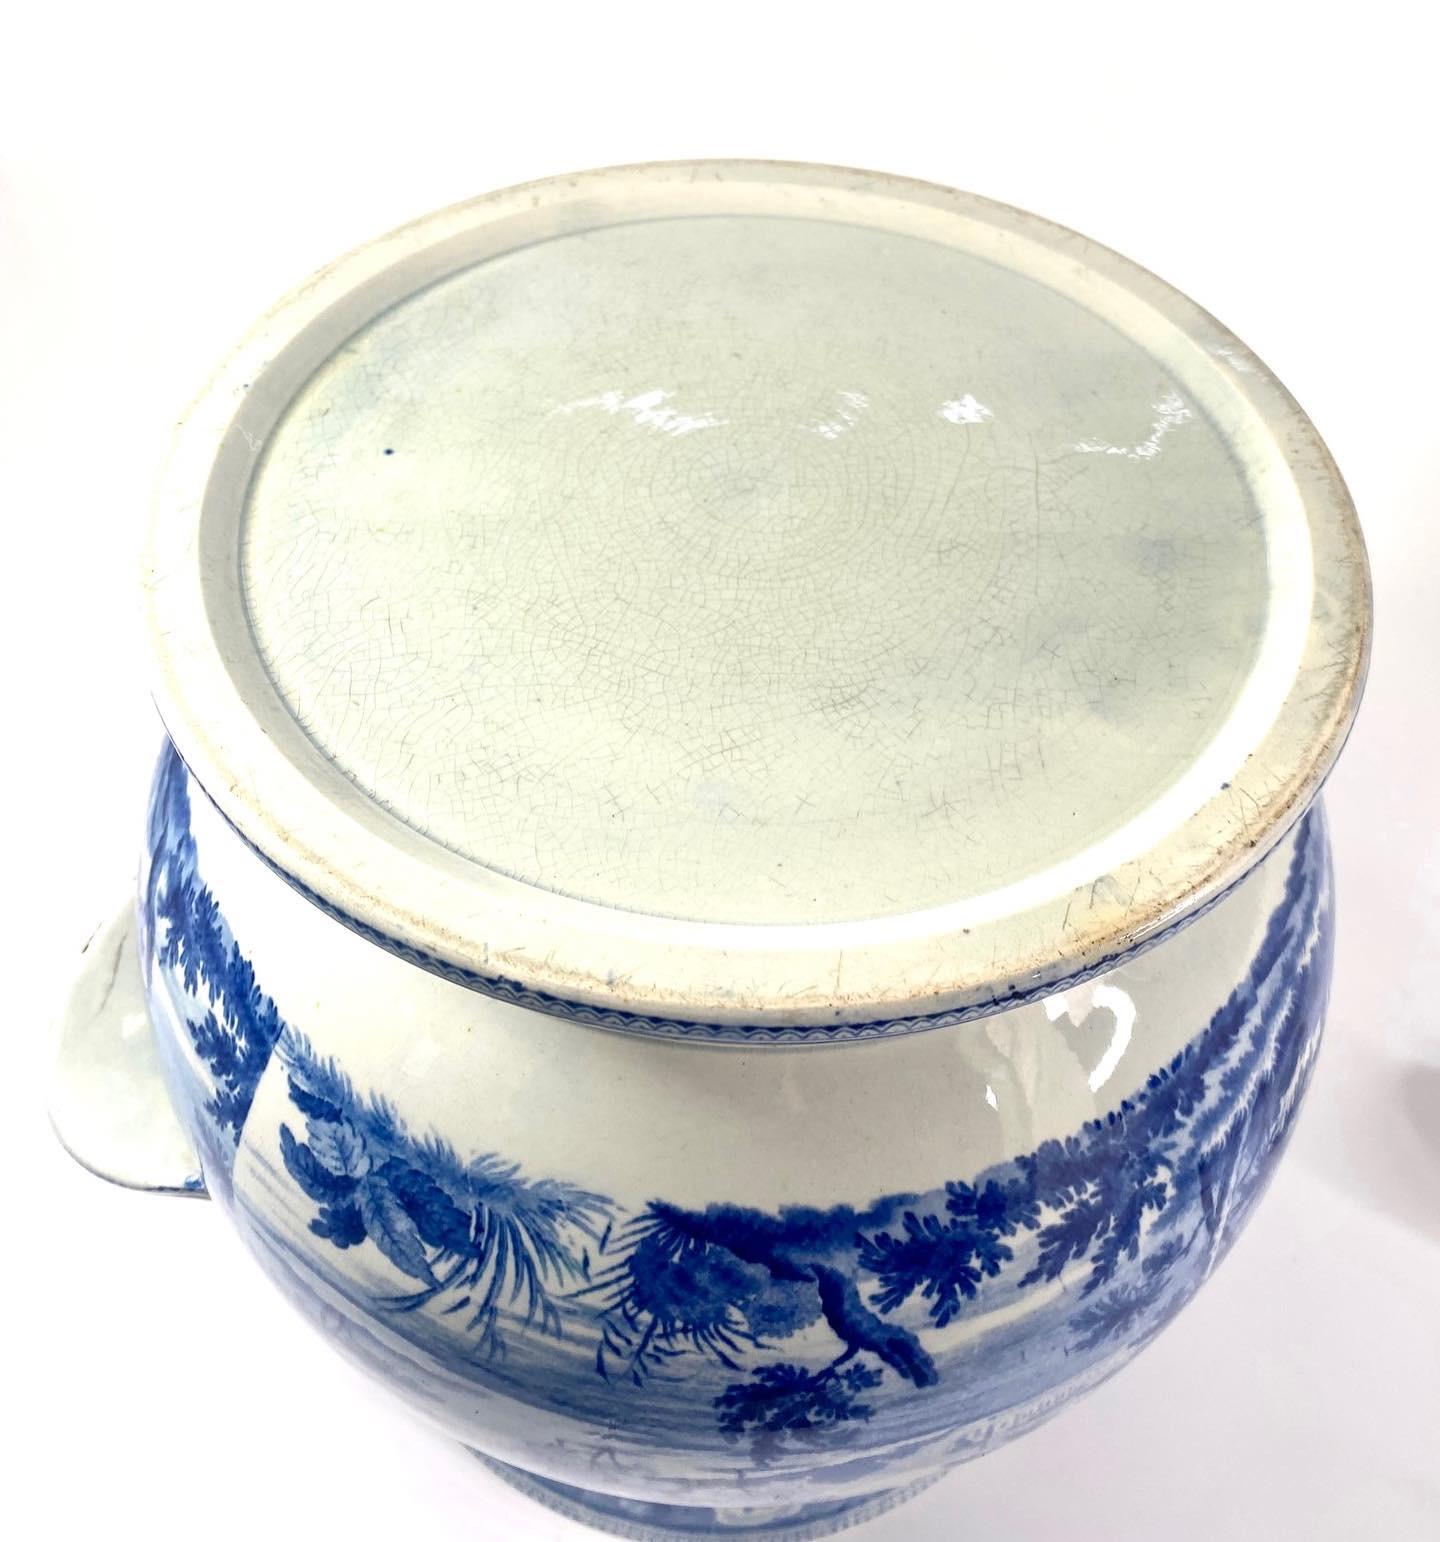 Earthenware Staffordshire blue and white printed pail, c. 1830.